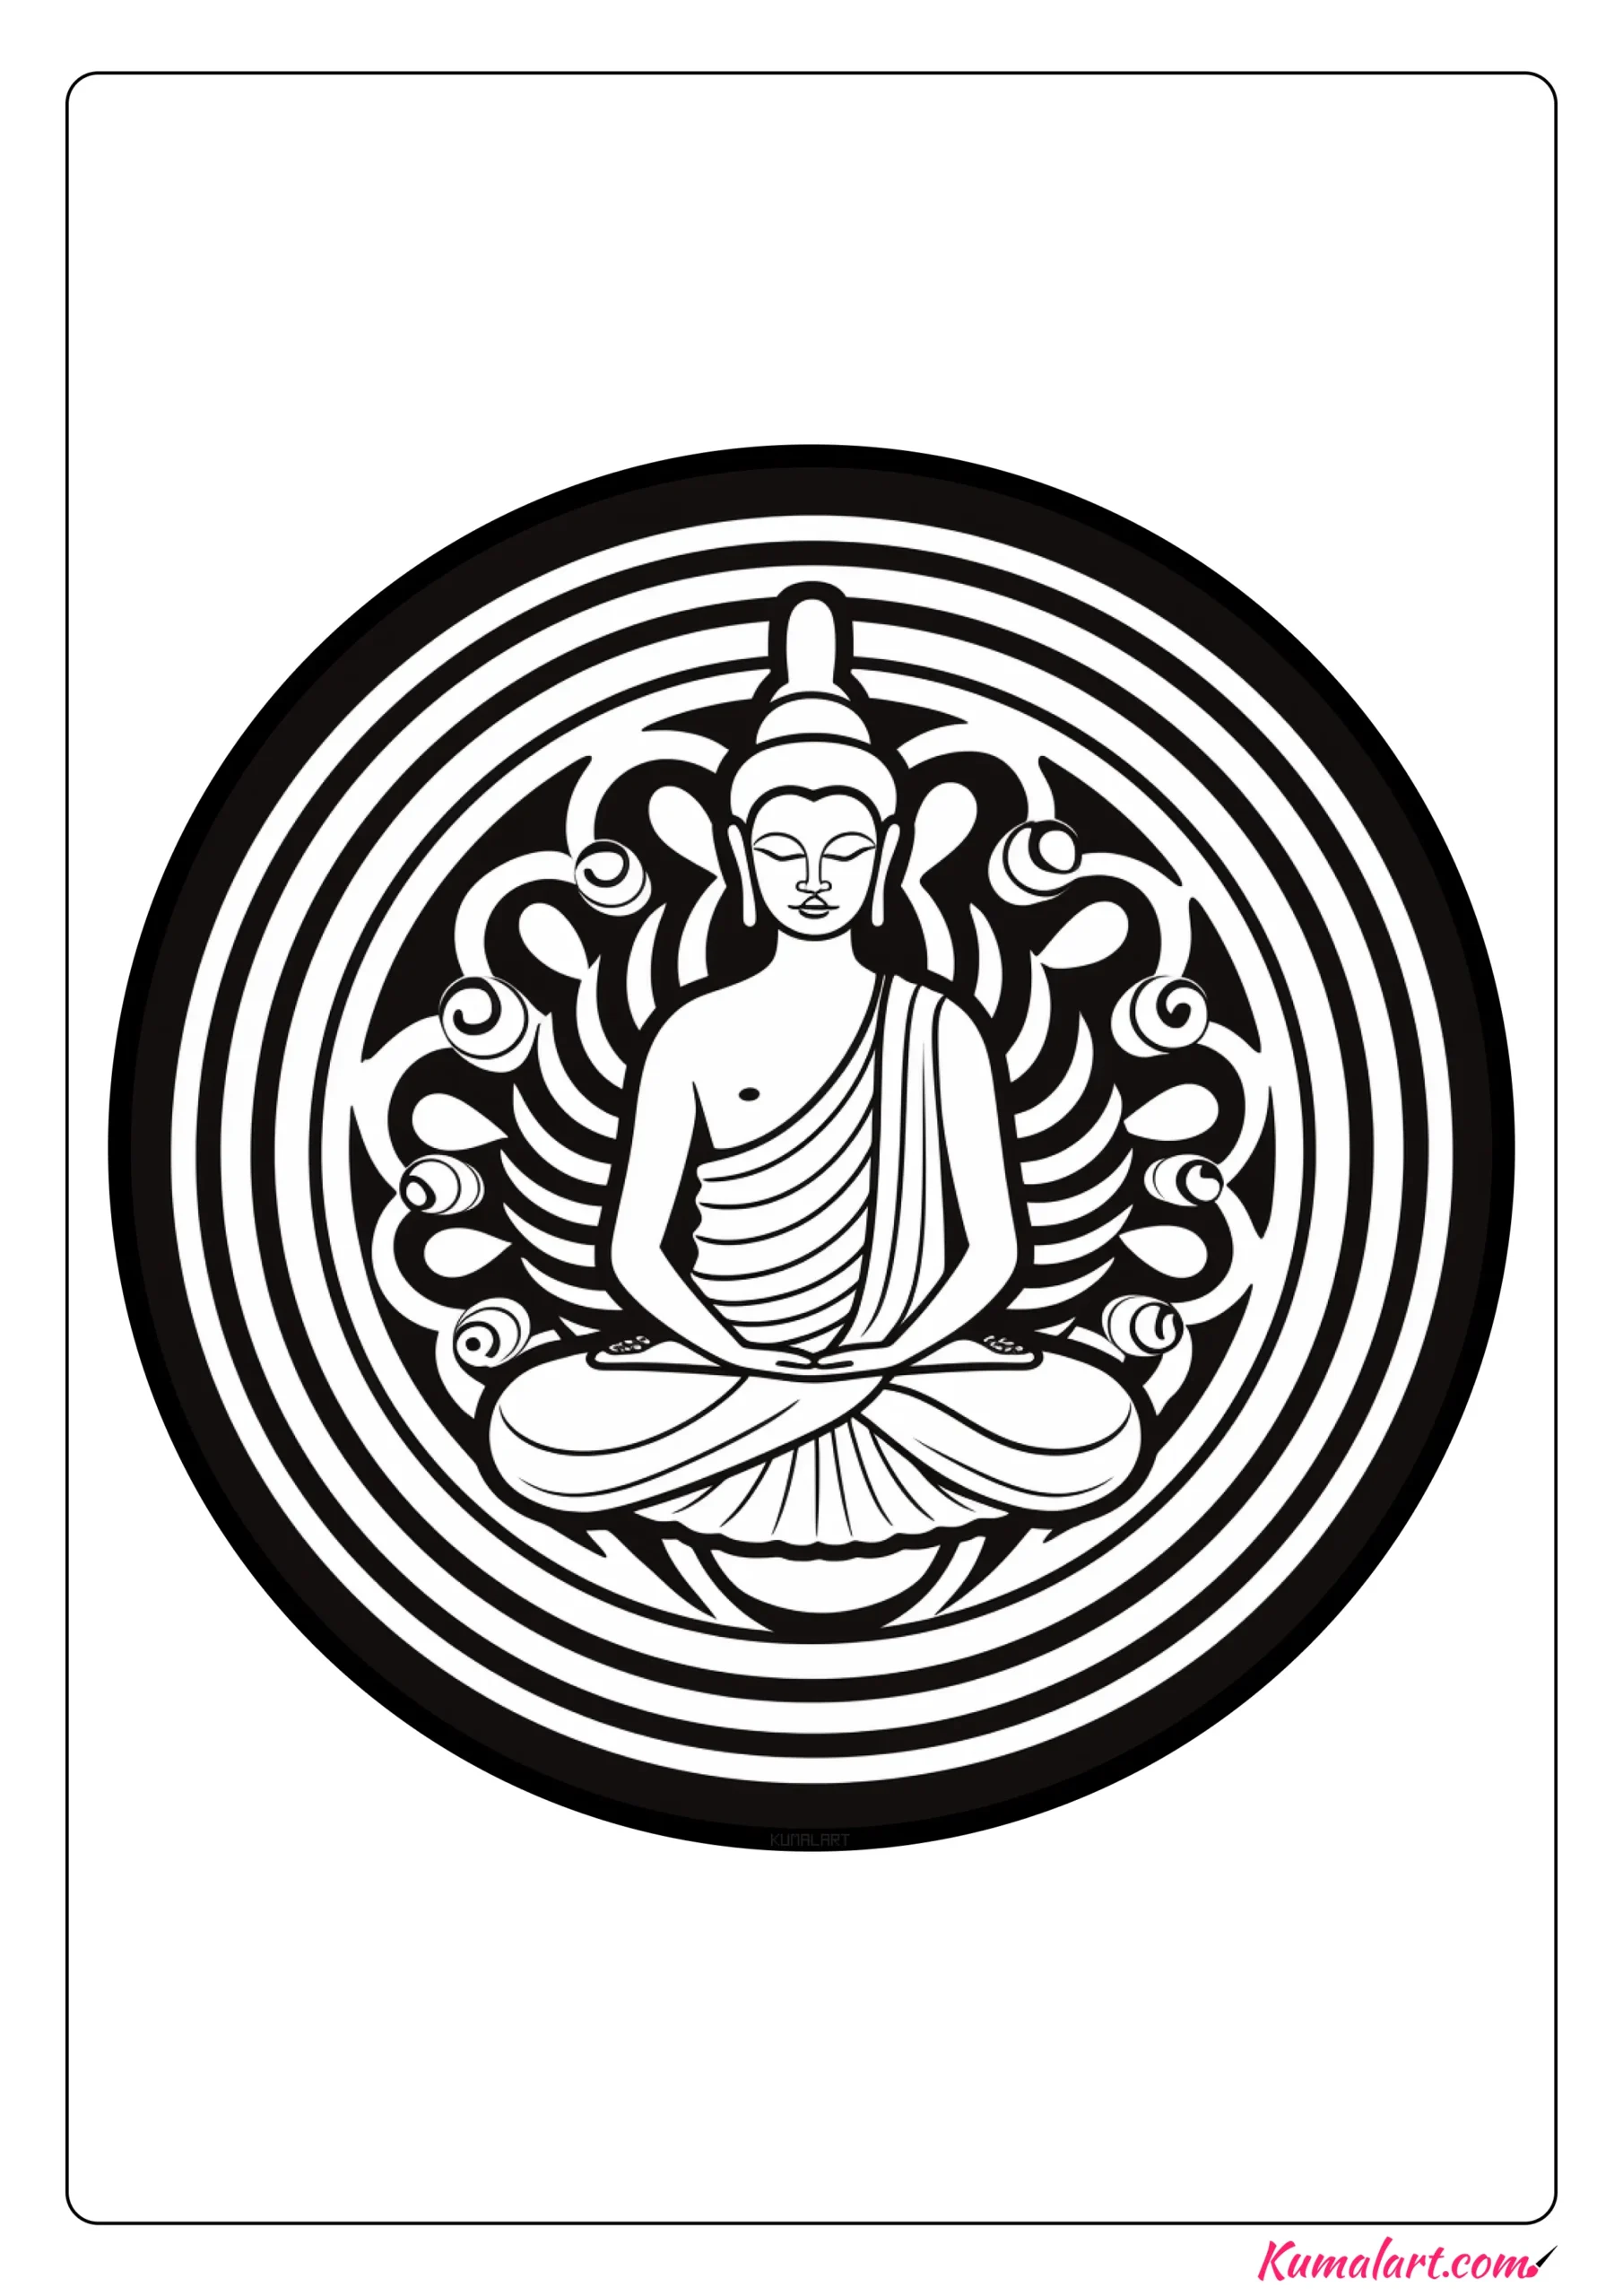 Compassionate Buddhist Coloring Page